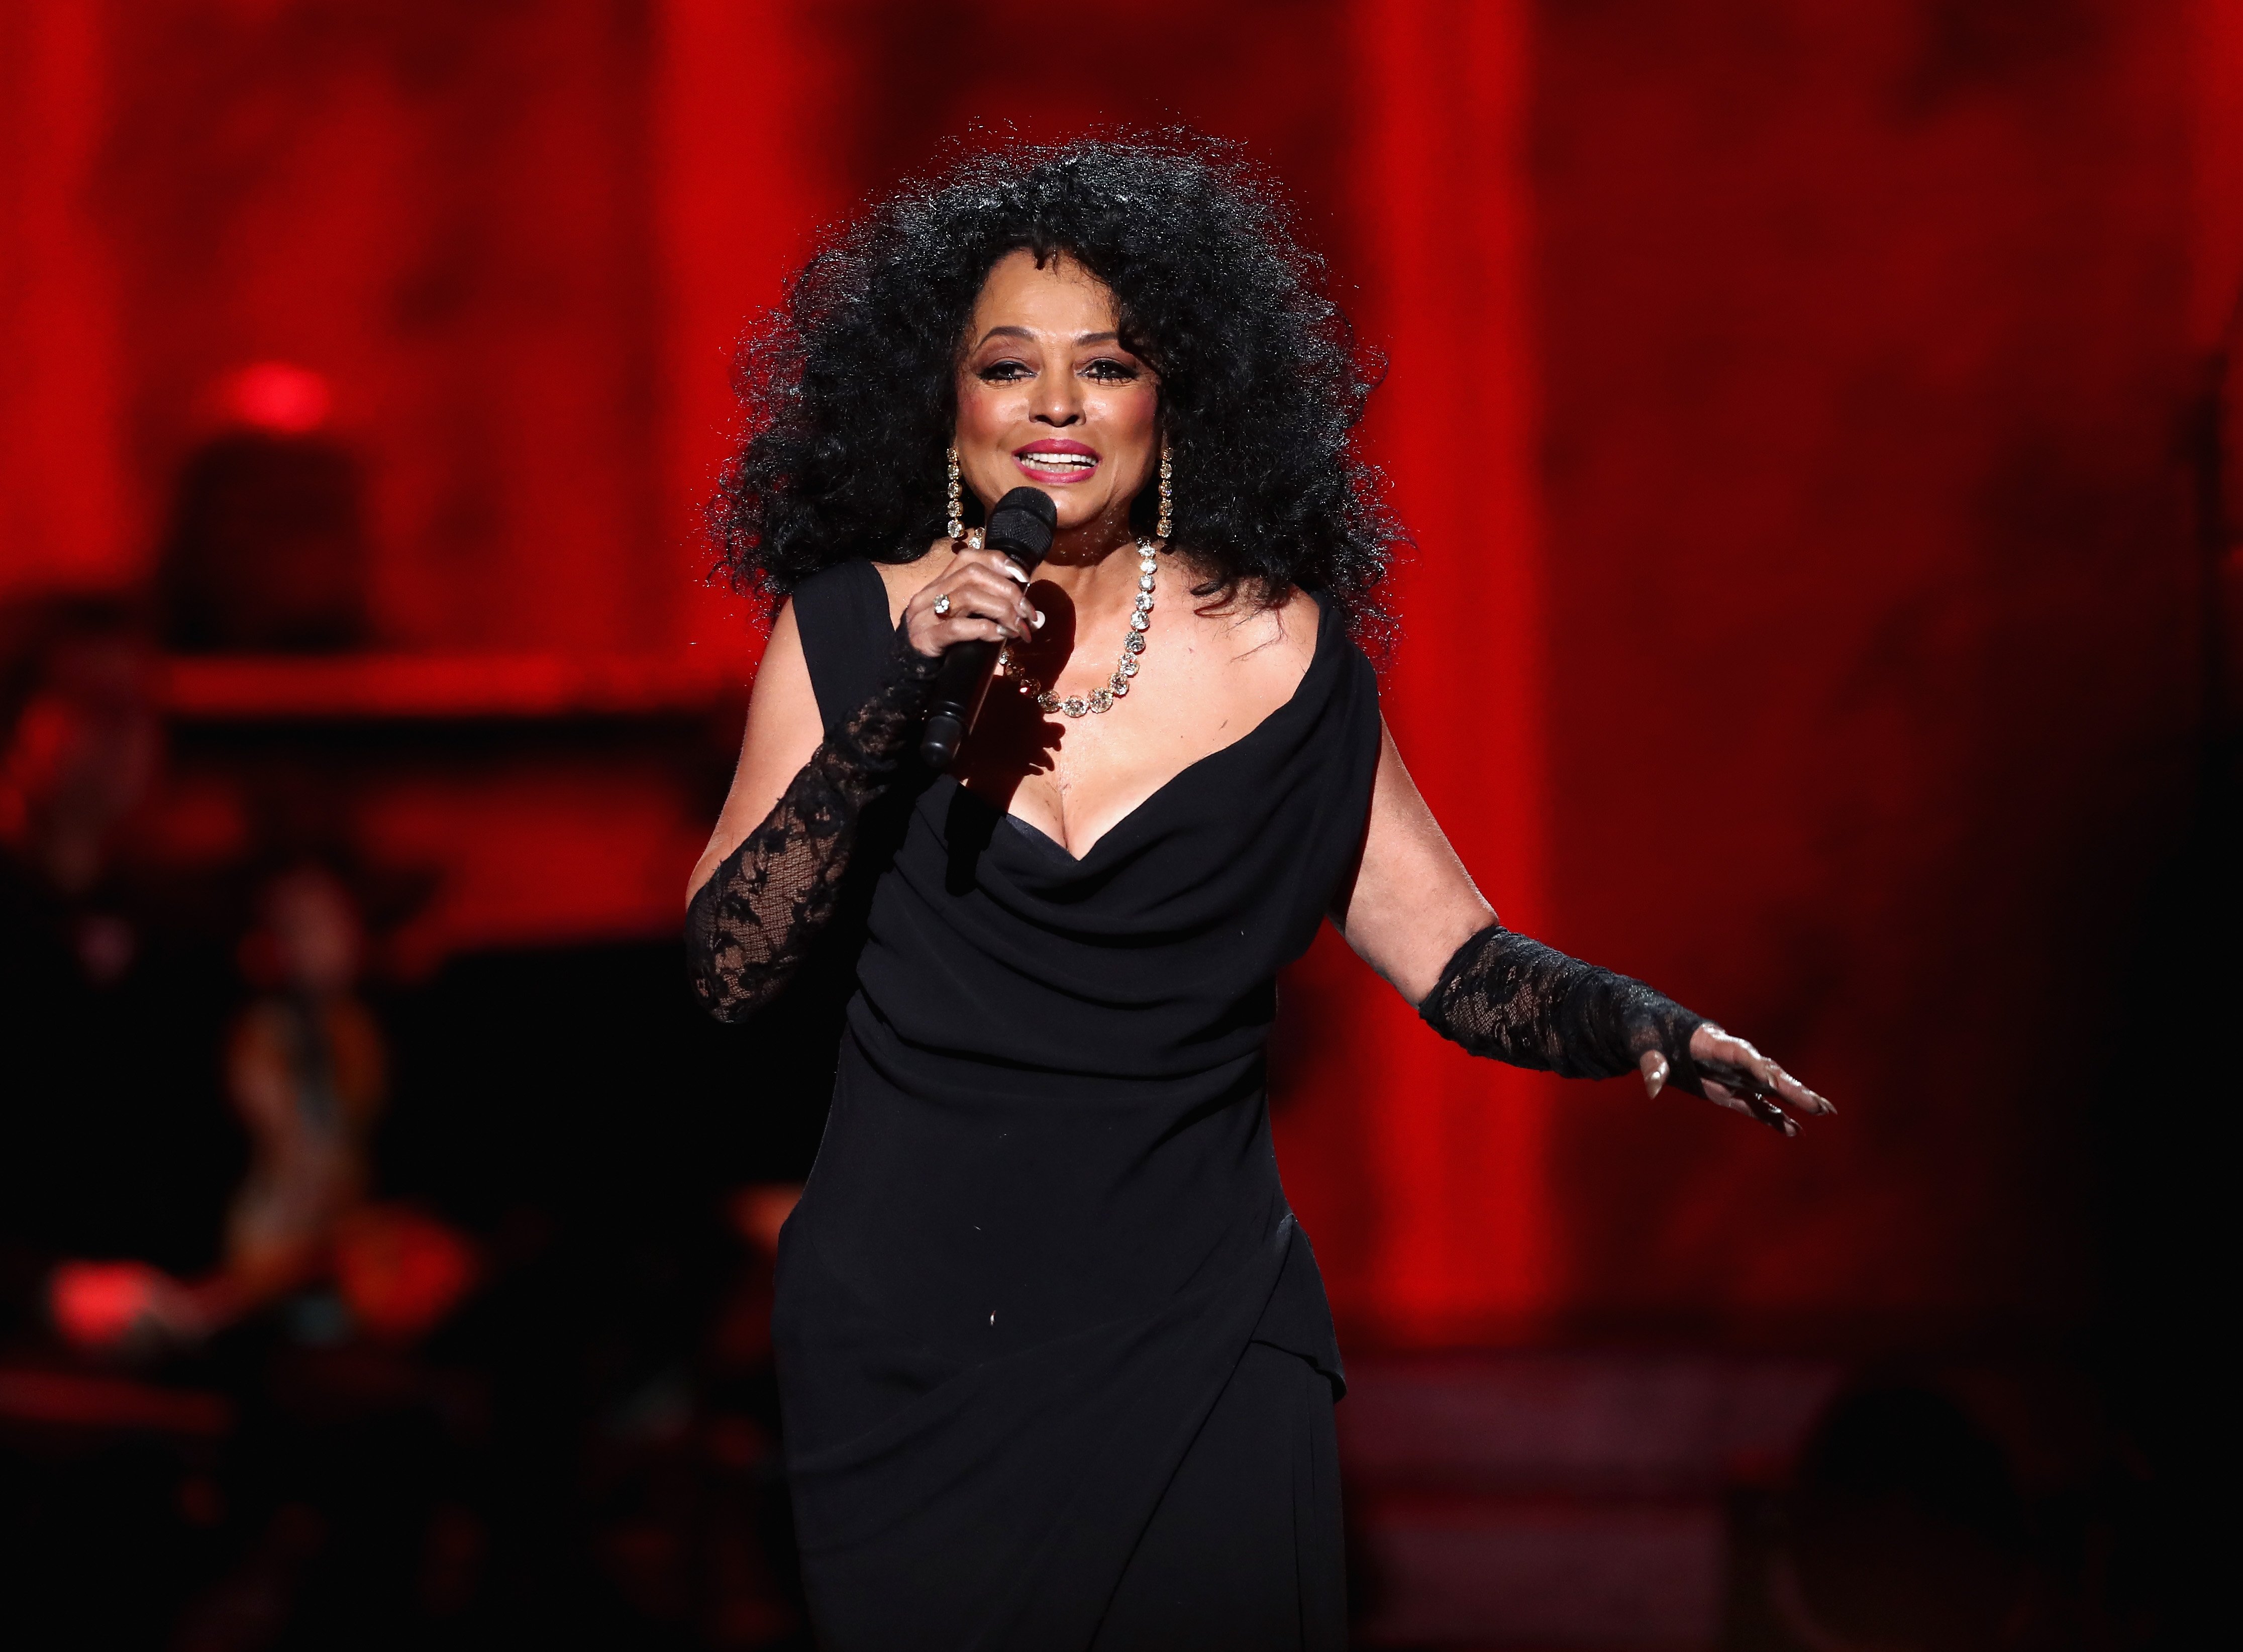 Diana Ross performs onstage during "Motown 60: A Grammy Celebration" at Microsoft Theater on February 12, 2019. | Source: Getty Images